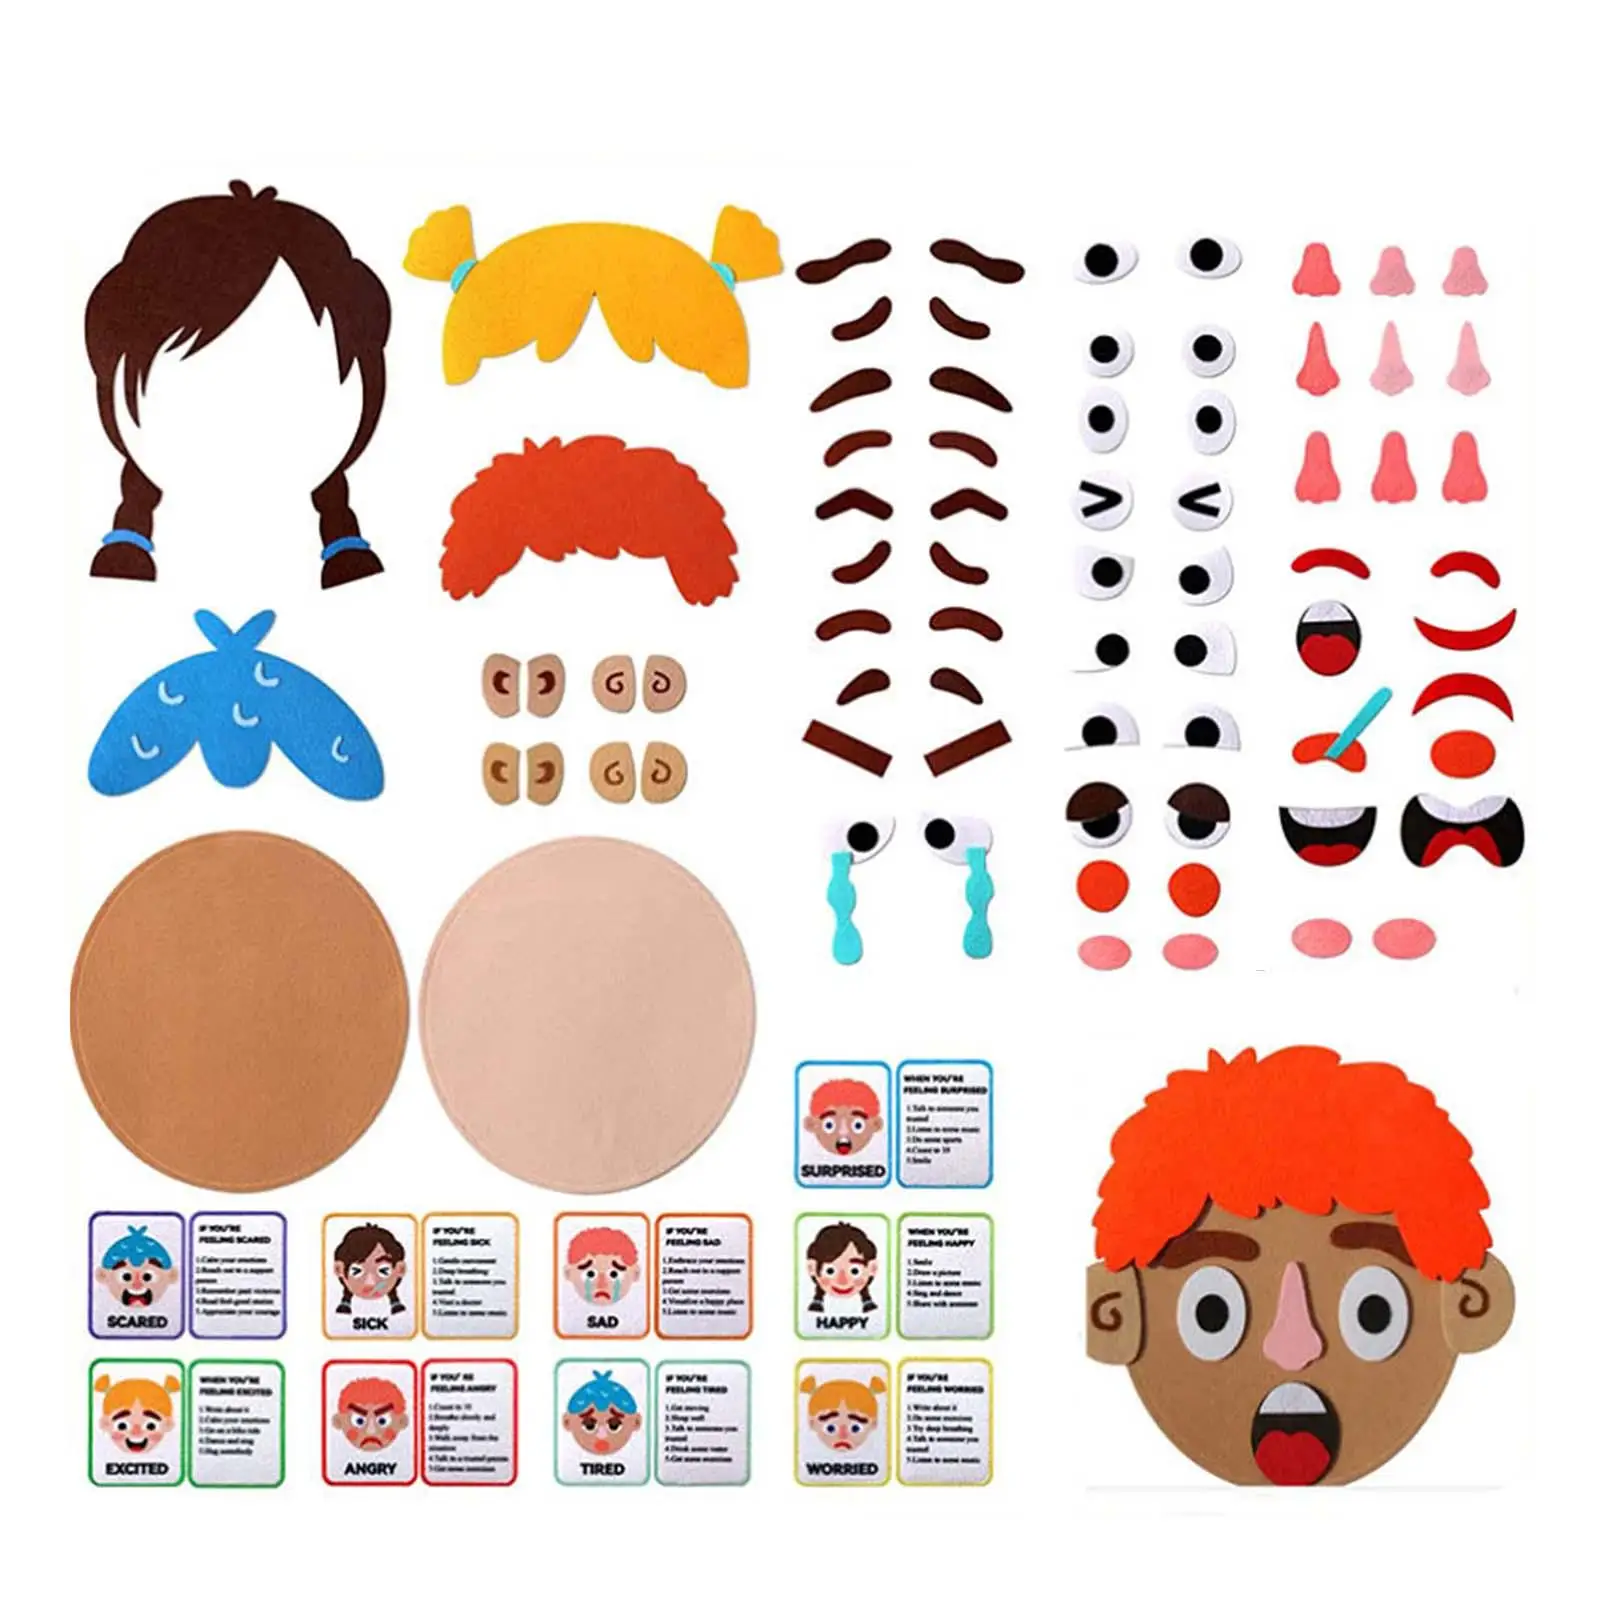 Social Emotional Learning Toy Activities Learning Preschool Make A Funny Faces Stickers Games Educational Toy for Toddlers Boys